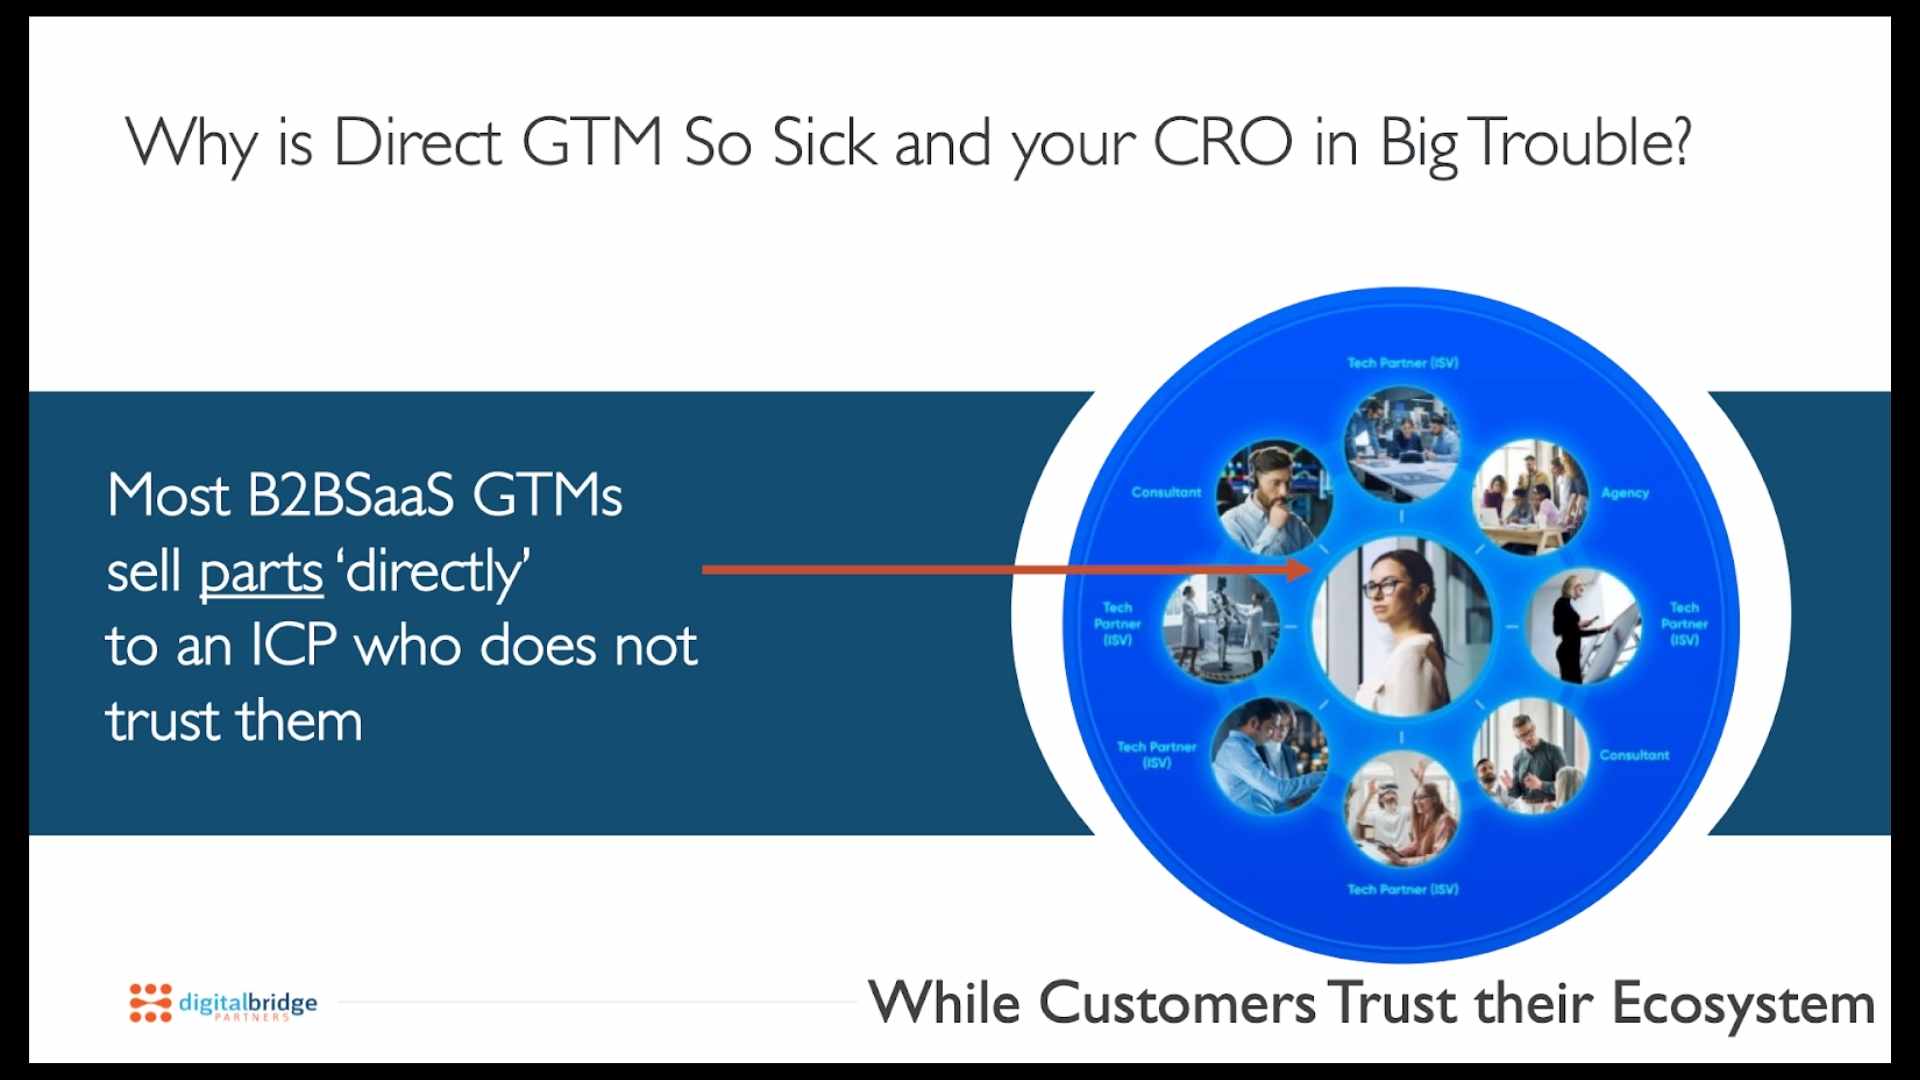 Why is Direct GTM So Sick? Infograph